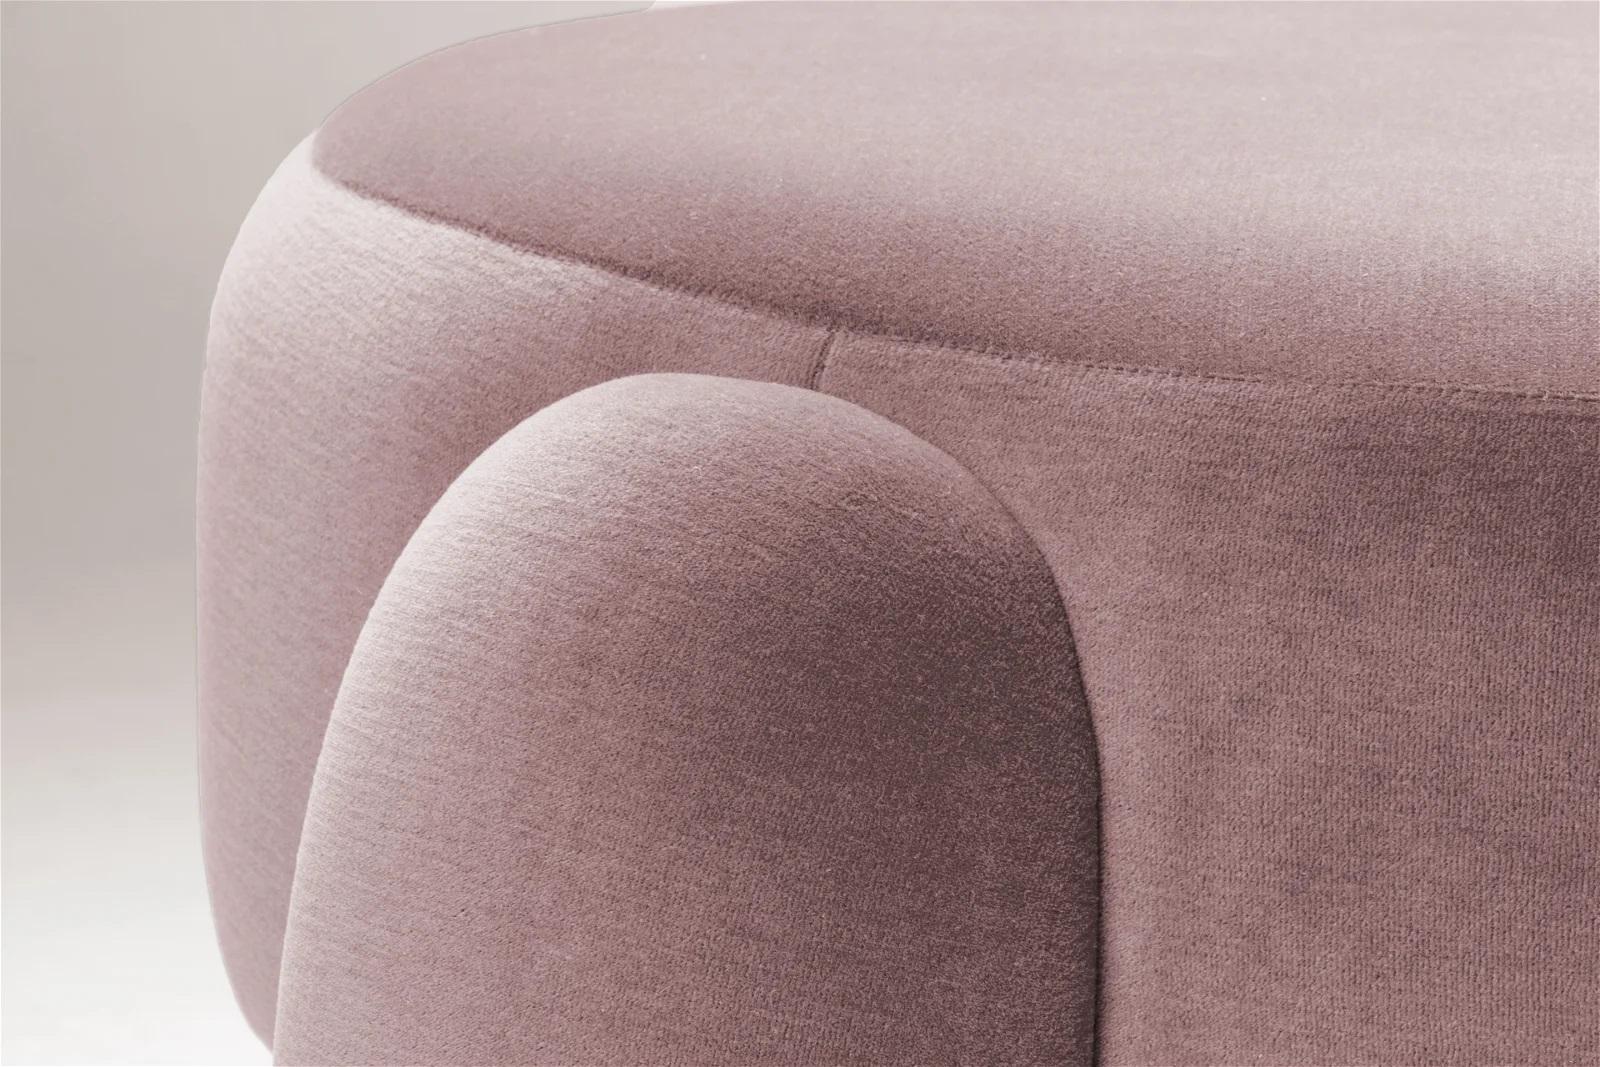 When pure geometry meets soft curves, something sculptural and sensual comes out. A fine dialogue between oversized legs and clean lines takes place in this piece upholstered in mohair velvet. Marlon is edgy and elegant at the same time, letting the